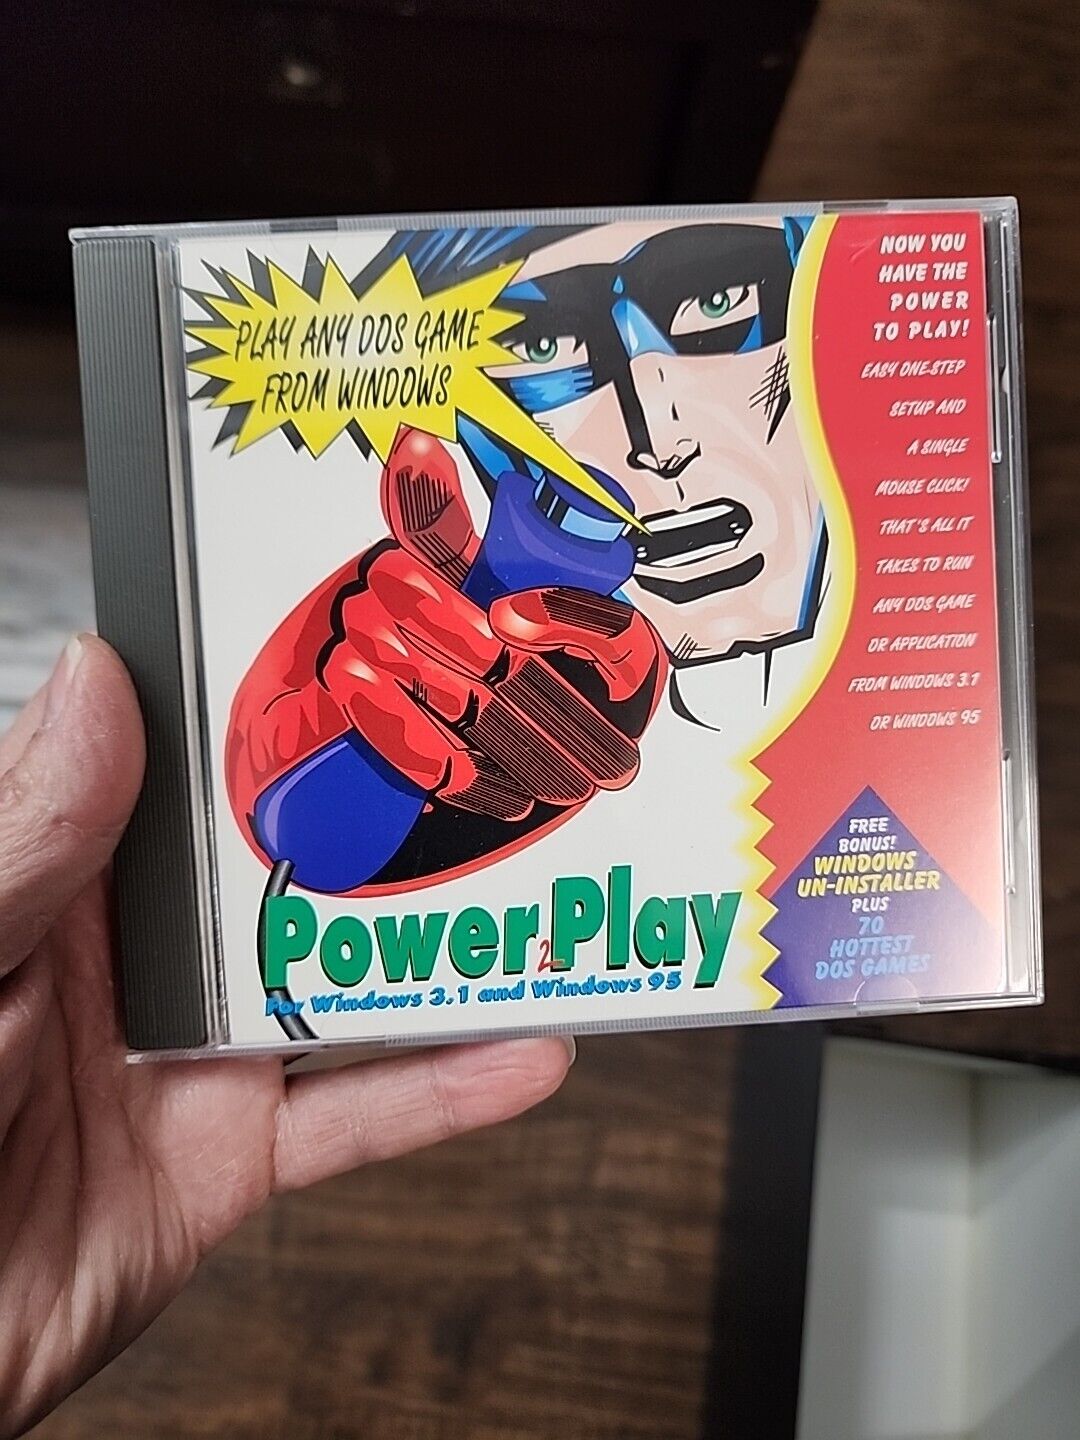 Power Play 2 for windows 3.1 and 95 \